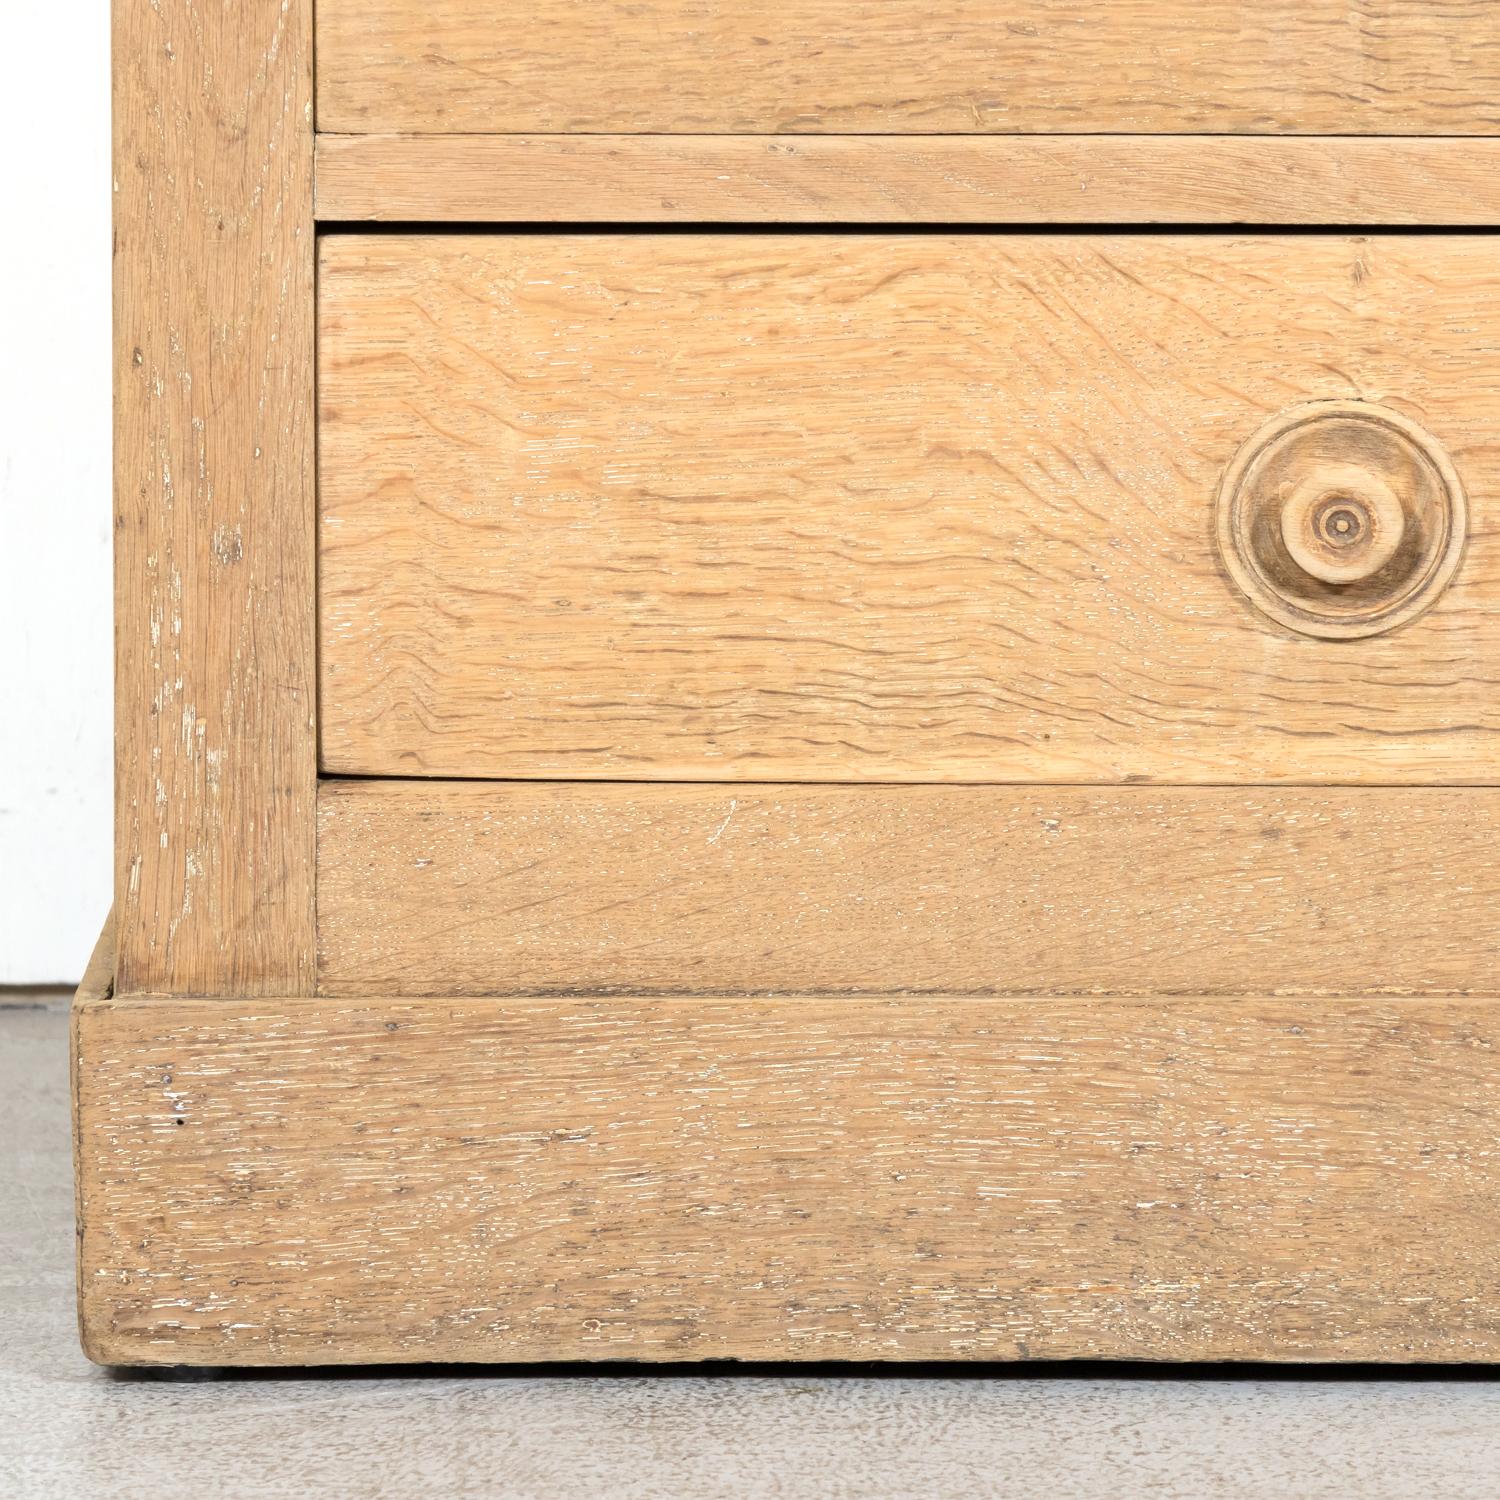 Mid-20th Century Vintage French Bleached Oak Meuble de Metiers or Workshop Chest of Drawers